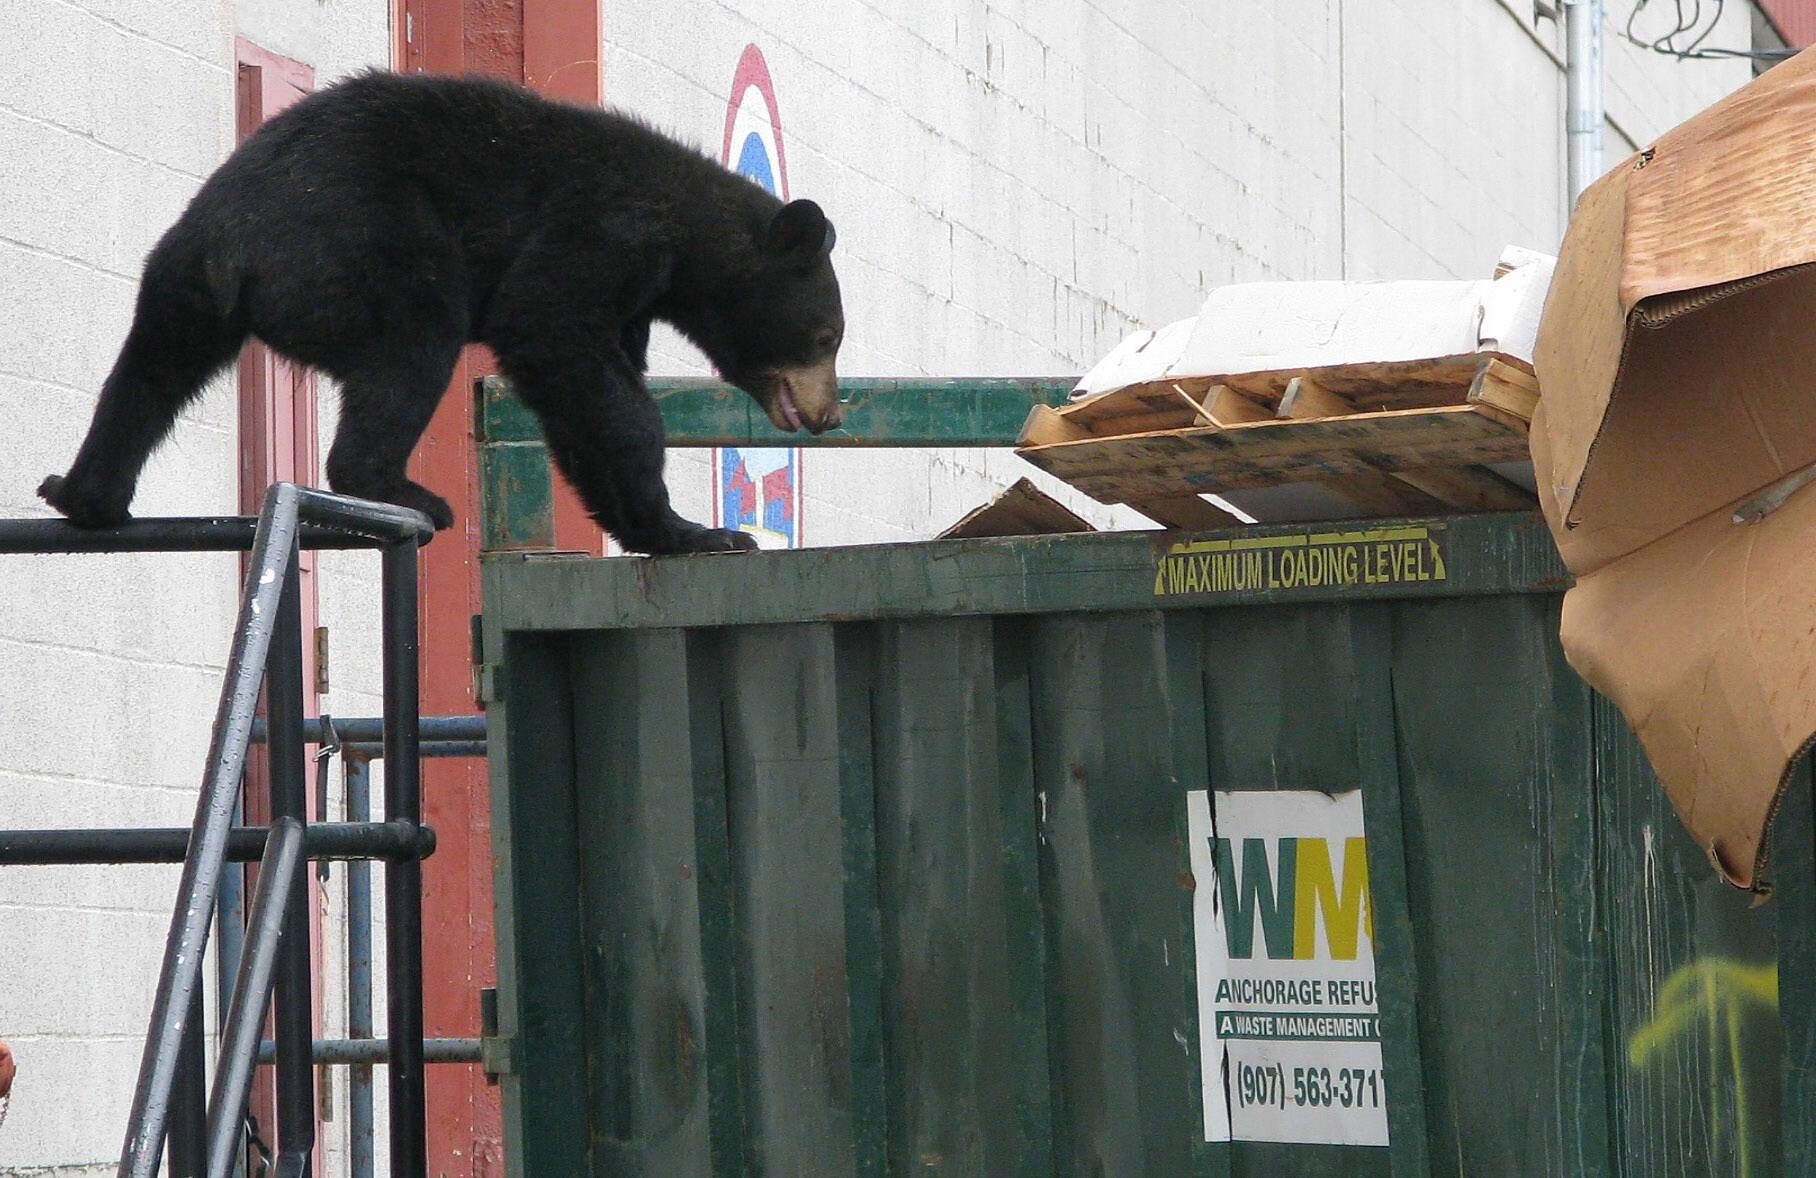 A young black bear climbs in a dumpster at Fort Richardson in Alaska. (Photo by Chris Garner, Dave Battle)